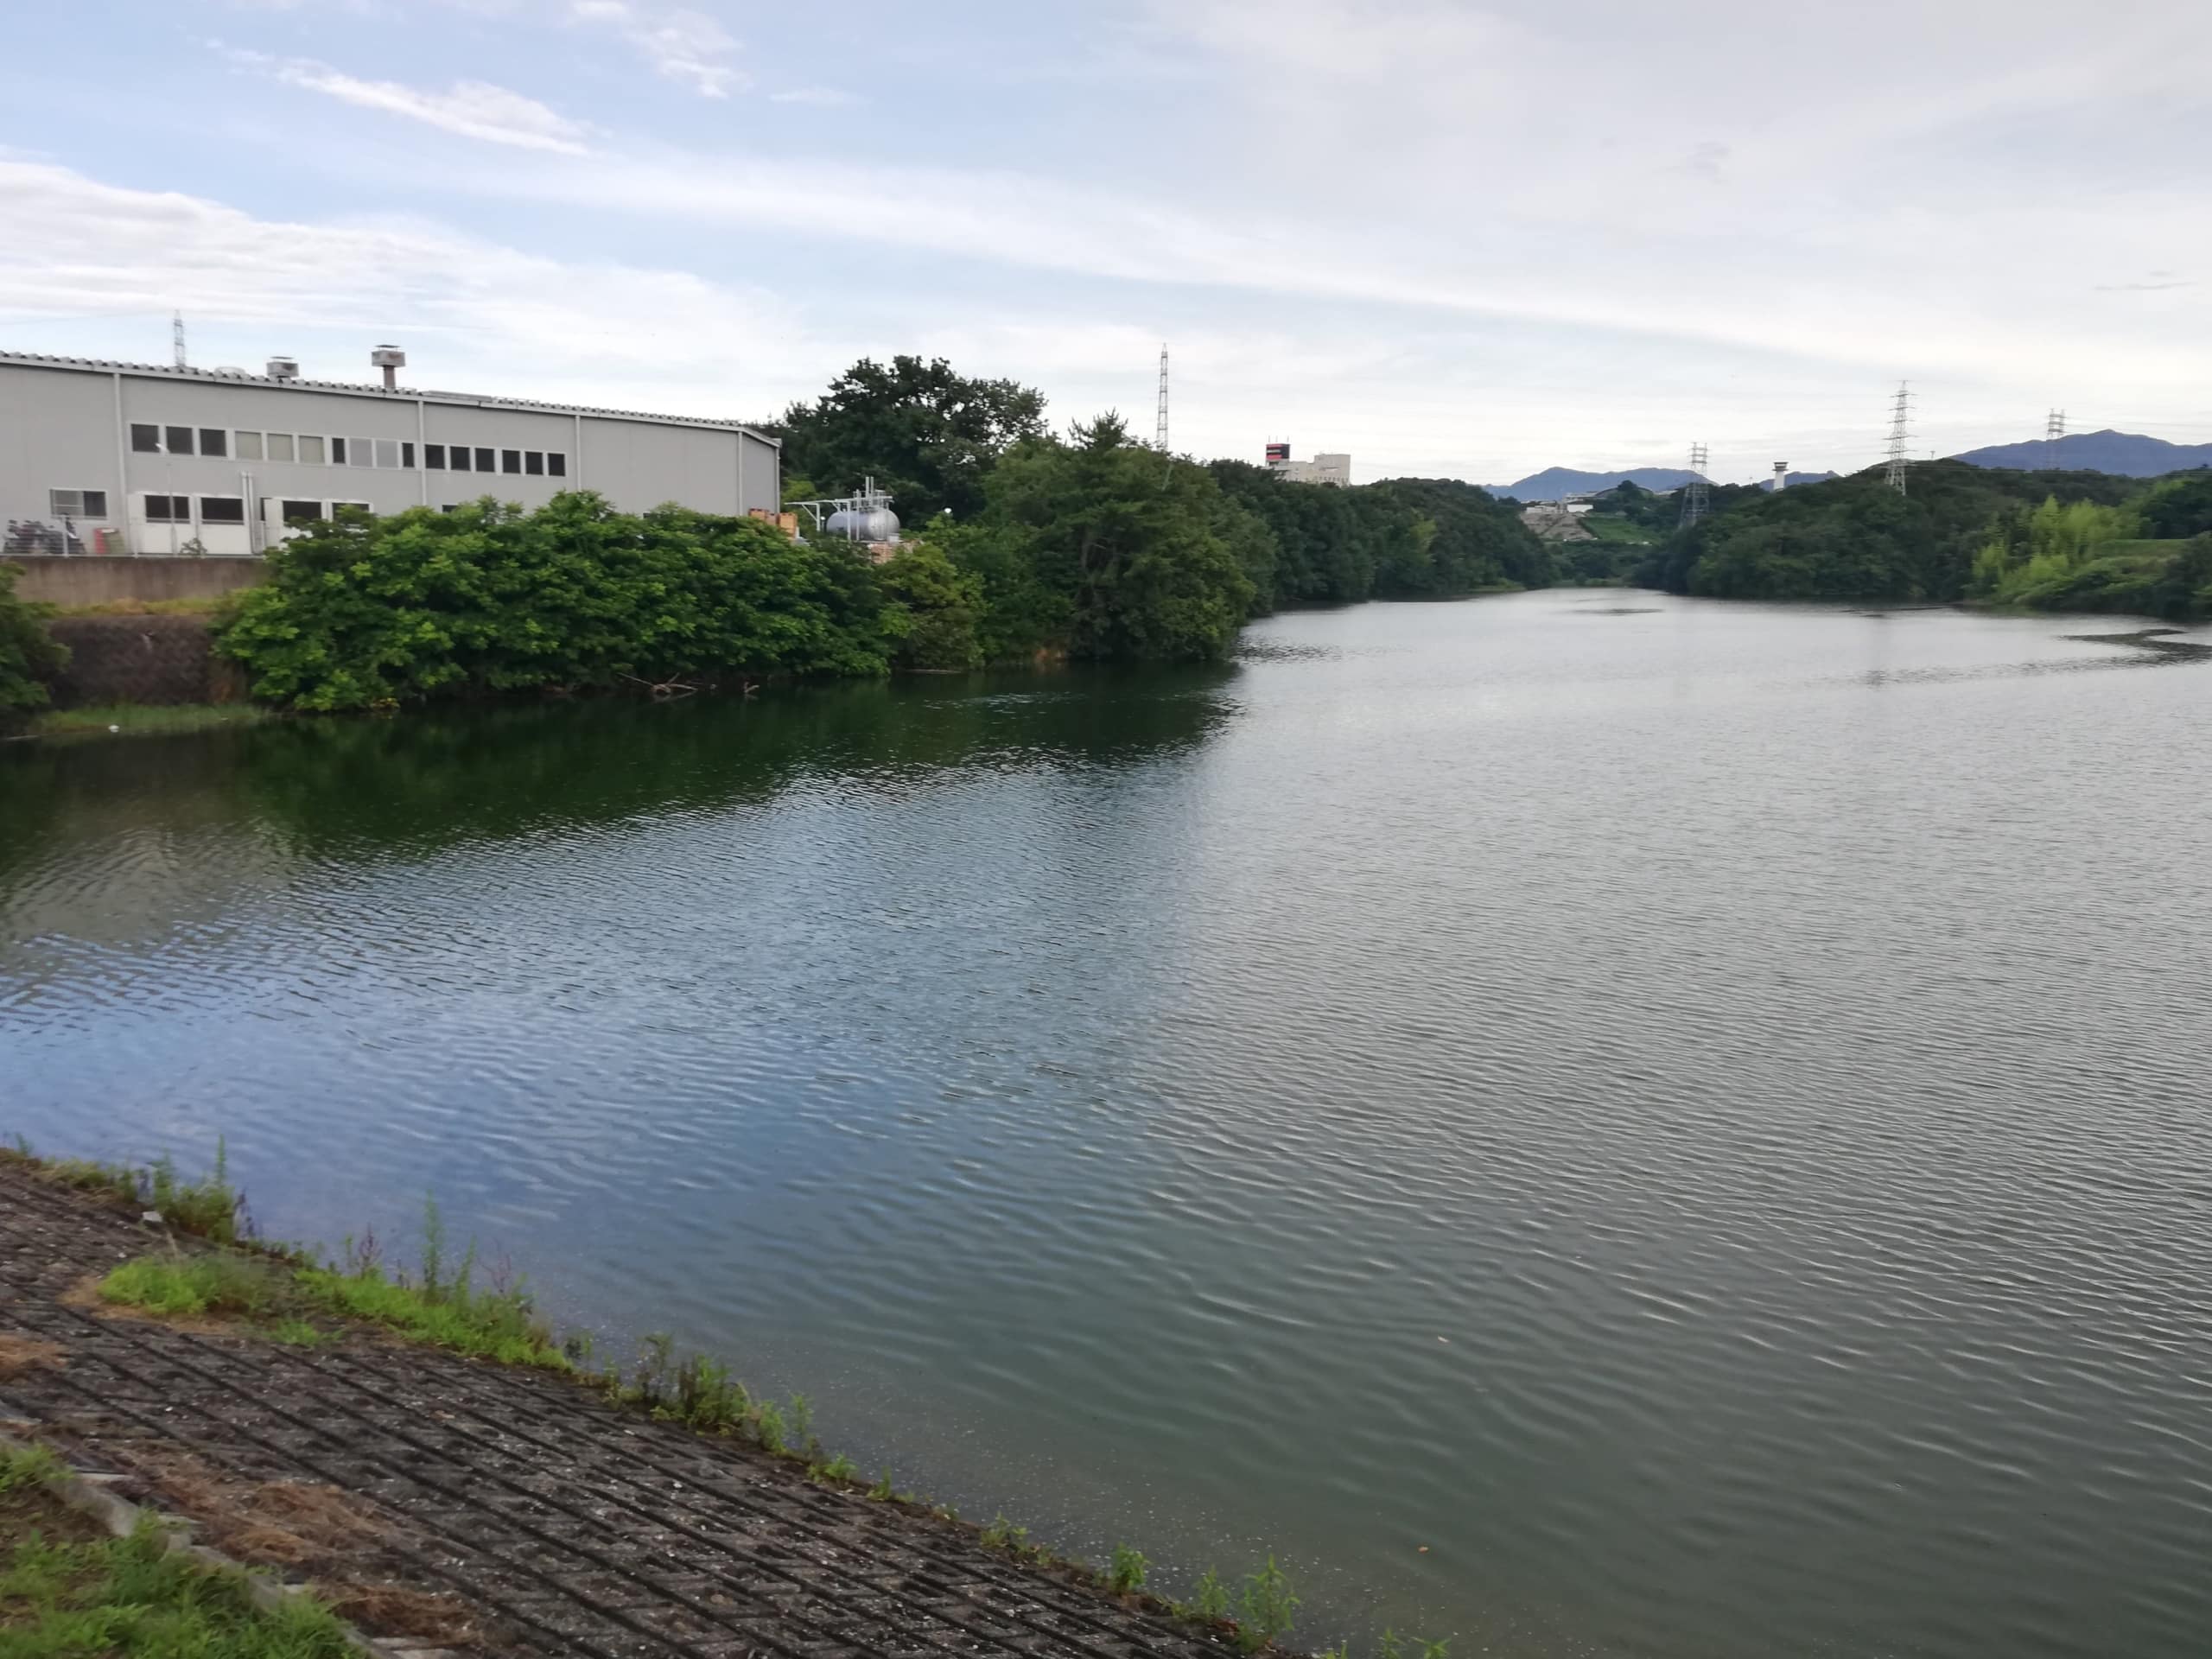 Ondani Ike floating solar project in Japan, view from the banks